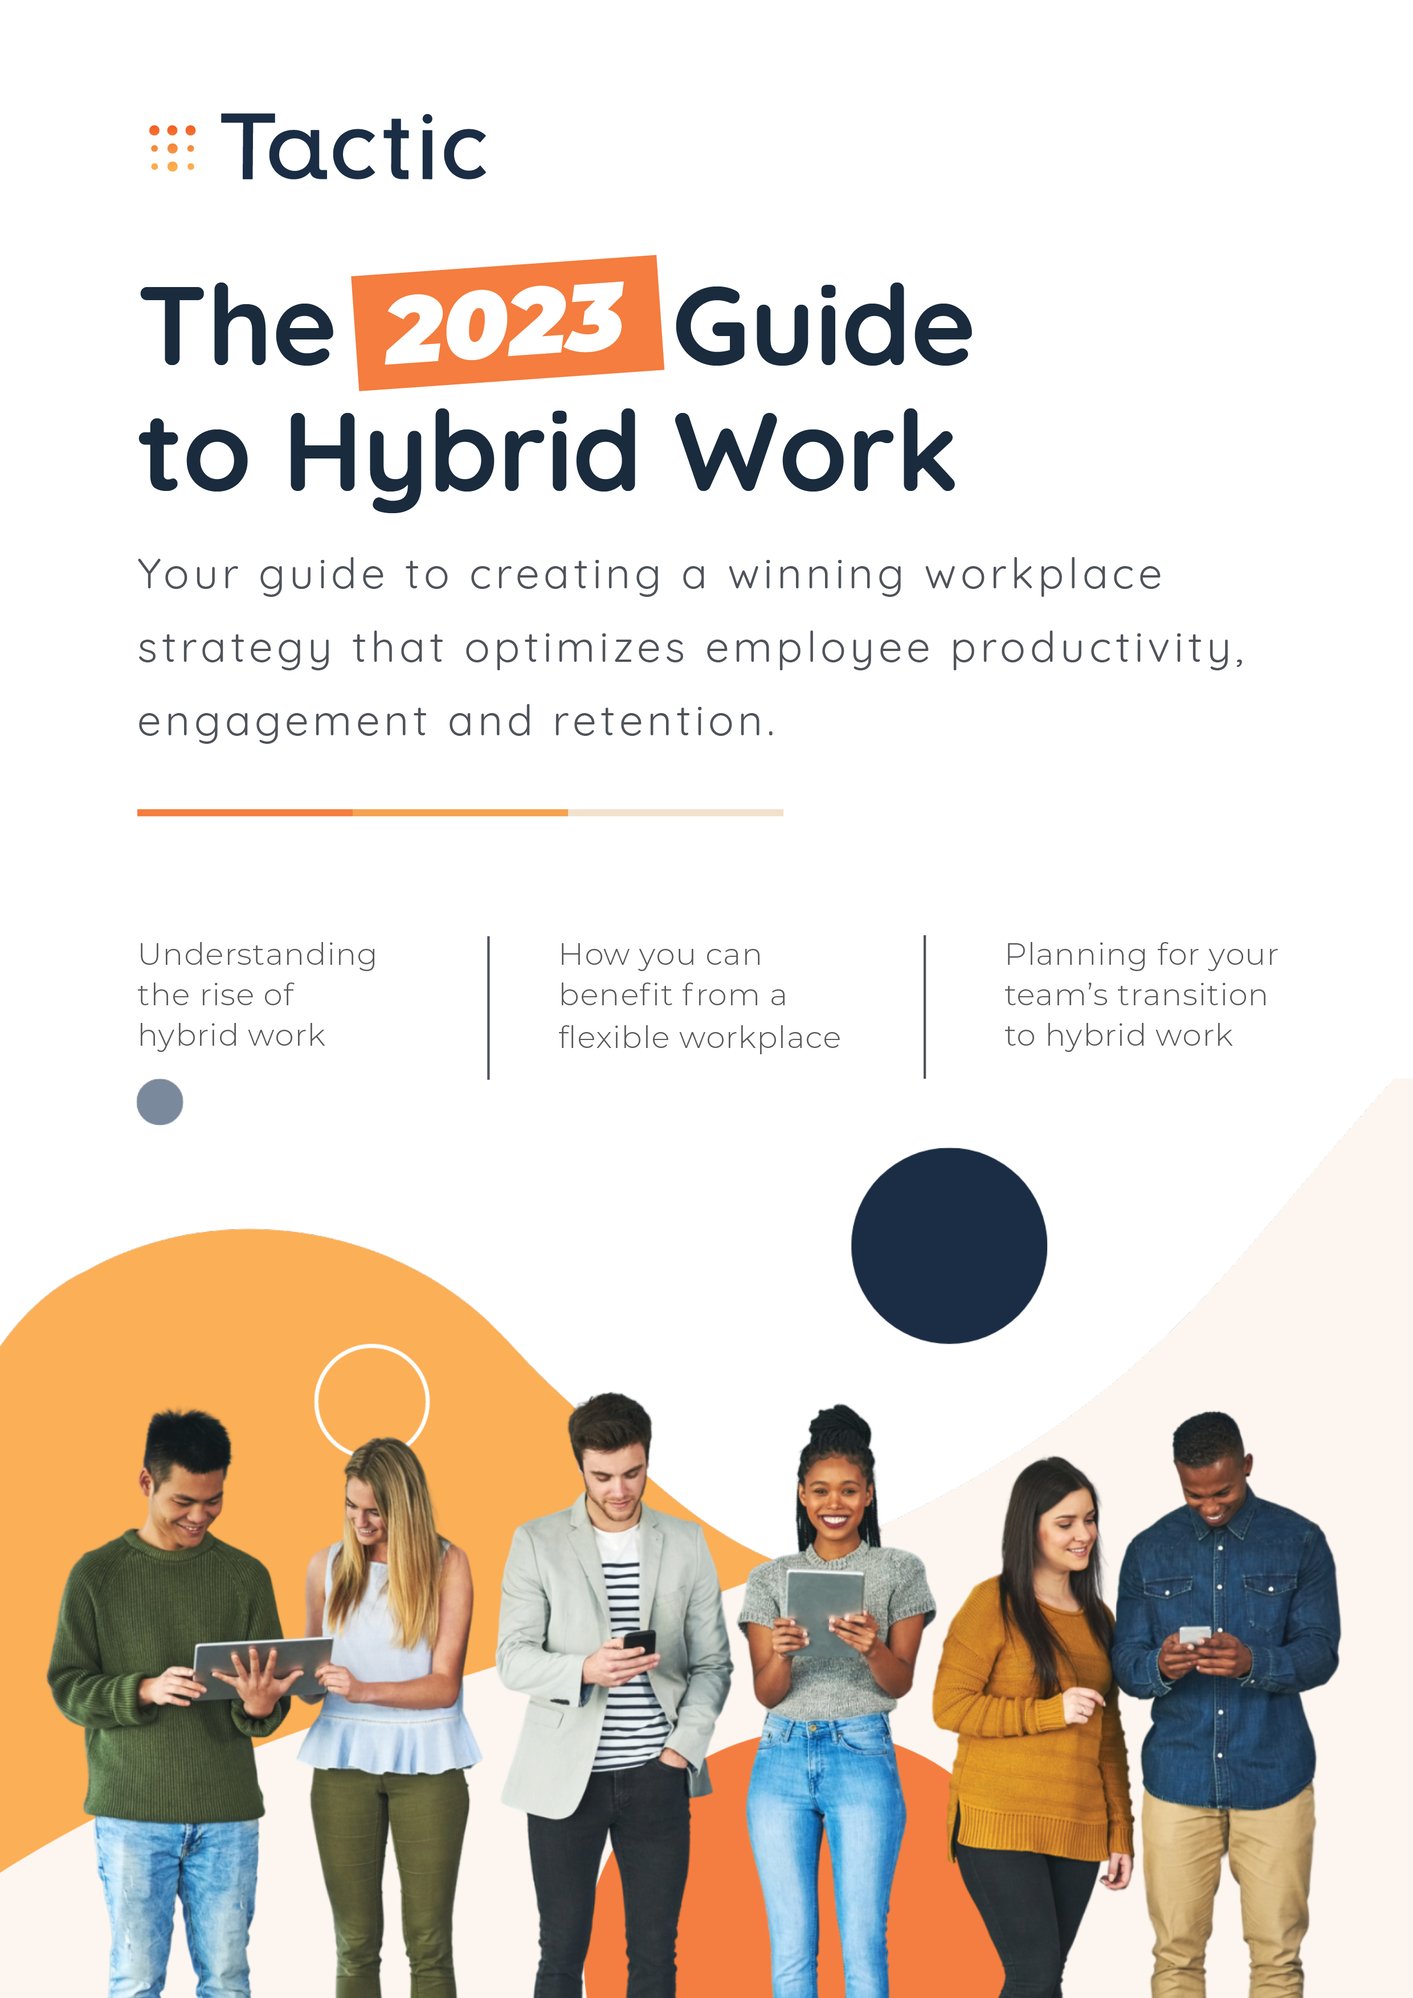 The 2023 Guide to Hybrid Work